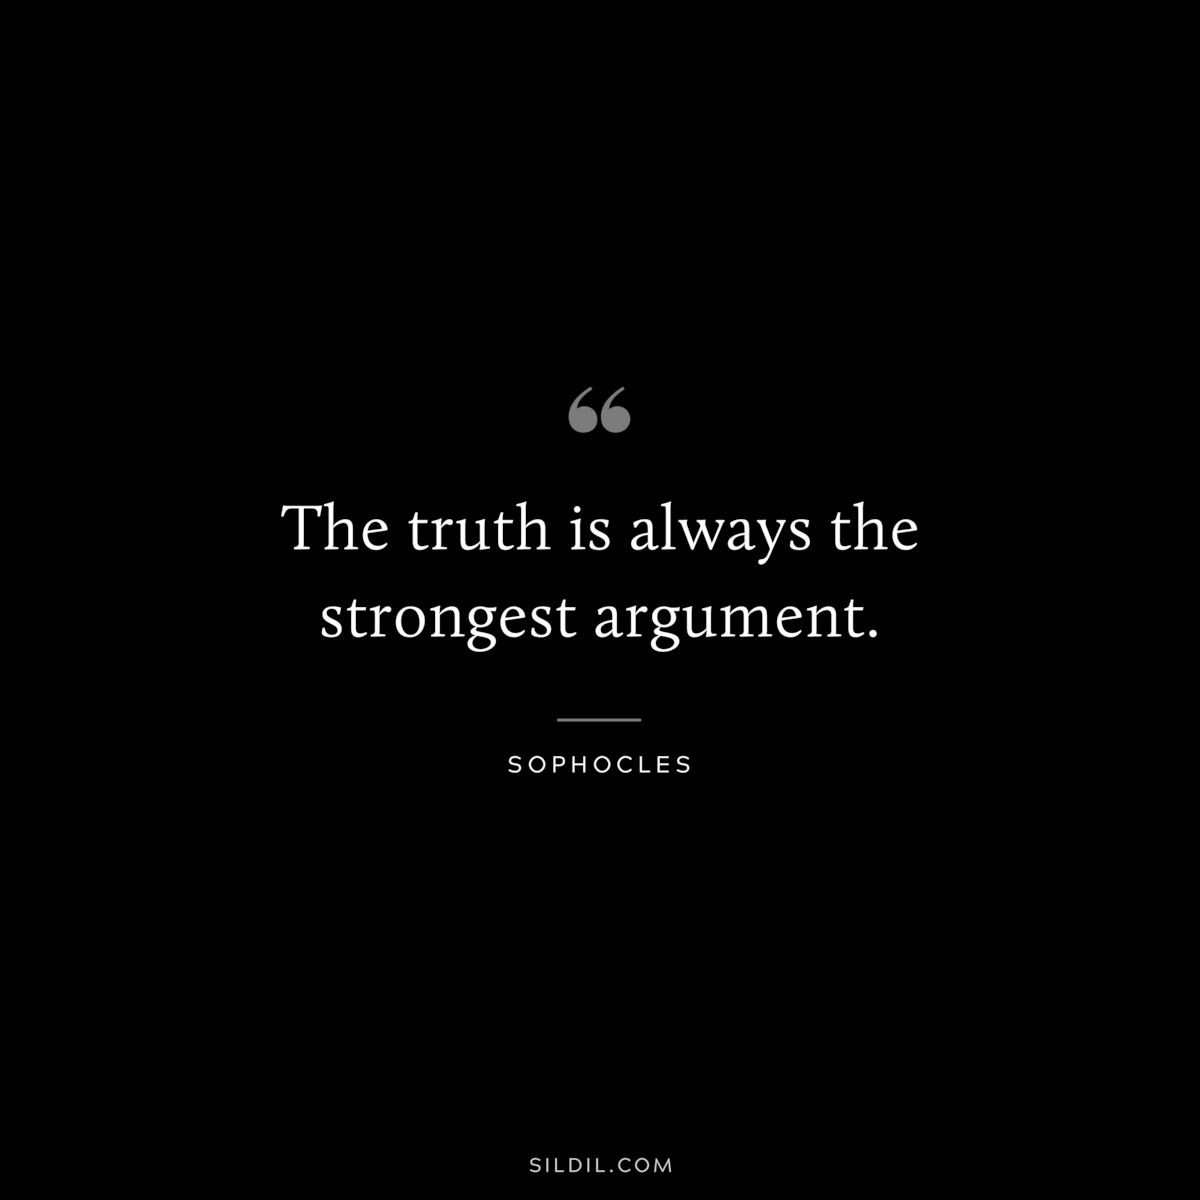 The truth is always the strongest argument. ― Sophocles